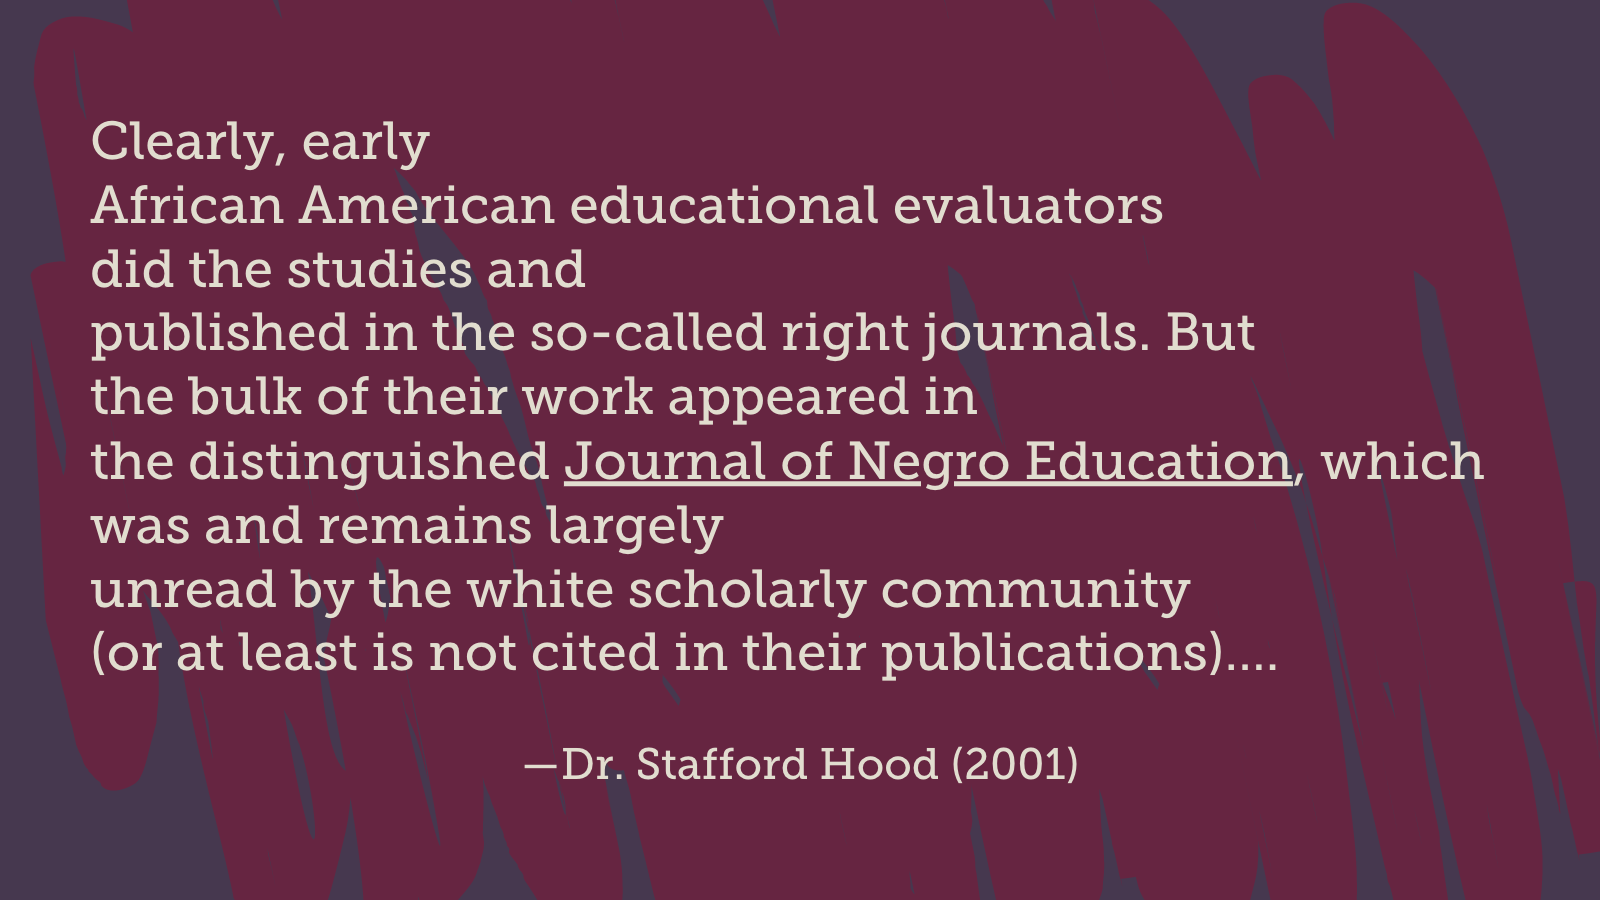 Clearly, early African American educational evaluators did the studies and published in the so-called right journals. But the bulk of their work appeared in the distinguished Journal of Negro Education, which was and remains largely unread by the white scholarly community (or at least is not cited in their publications)…. (Dr . Stafford Hood, 2001)